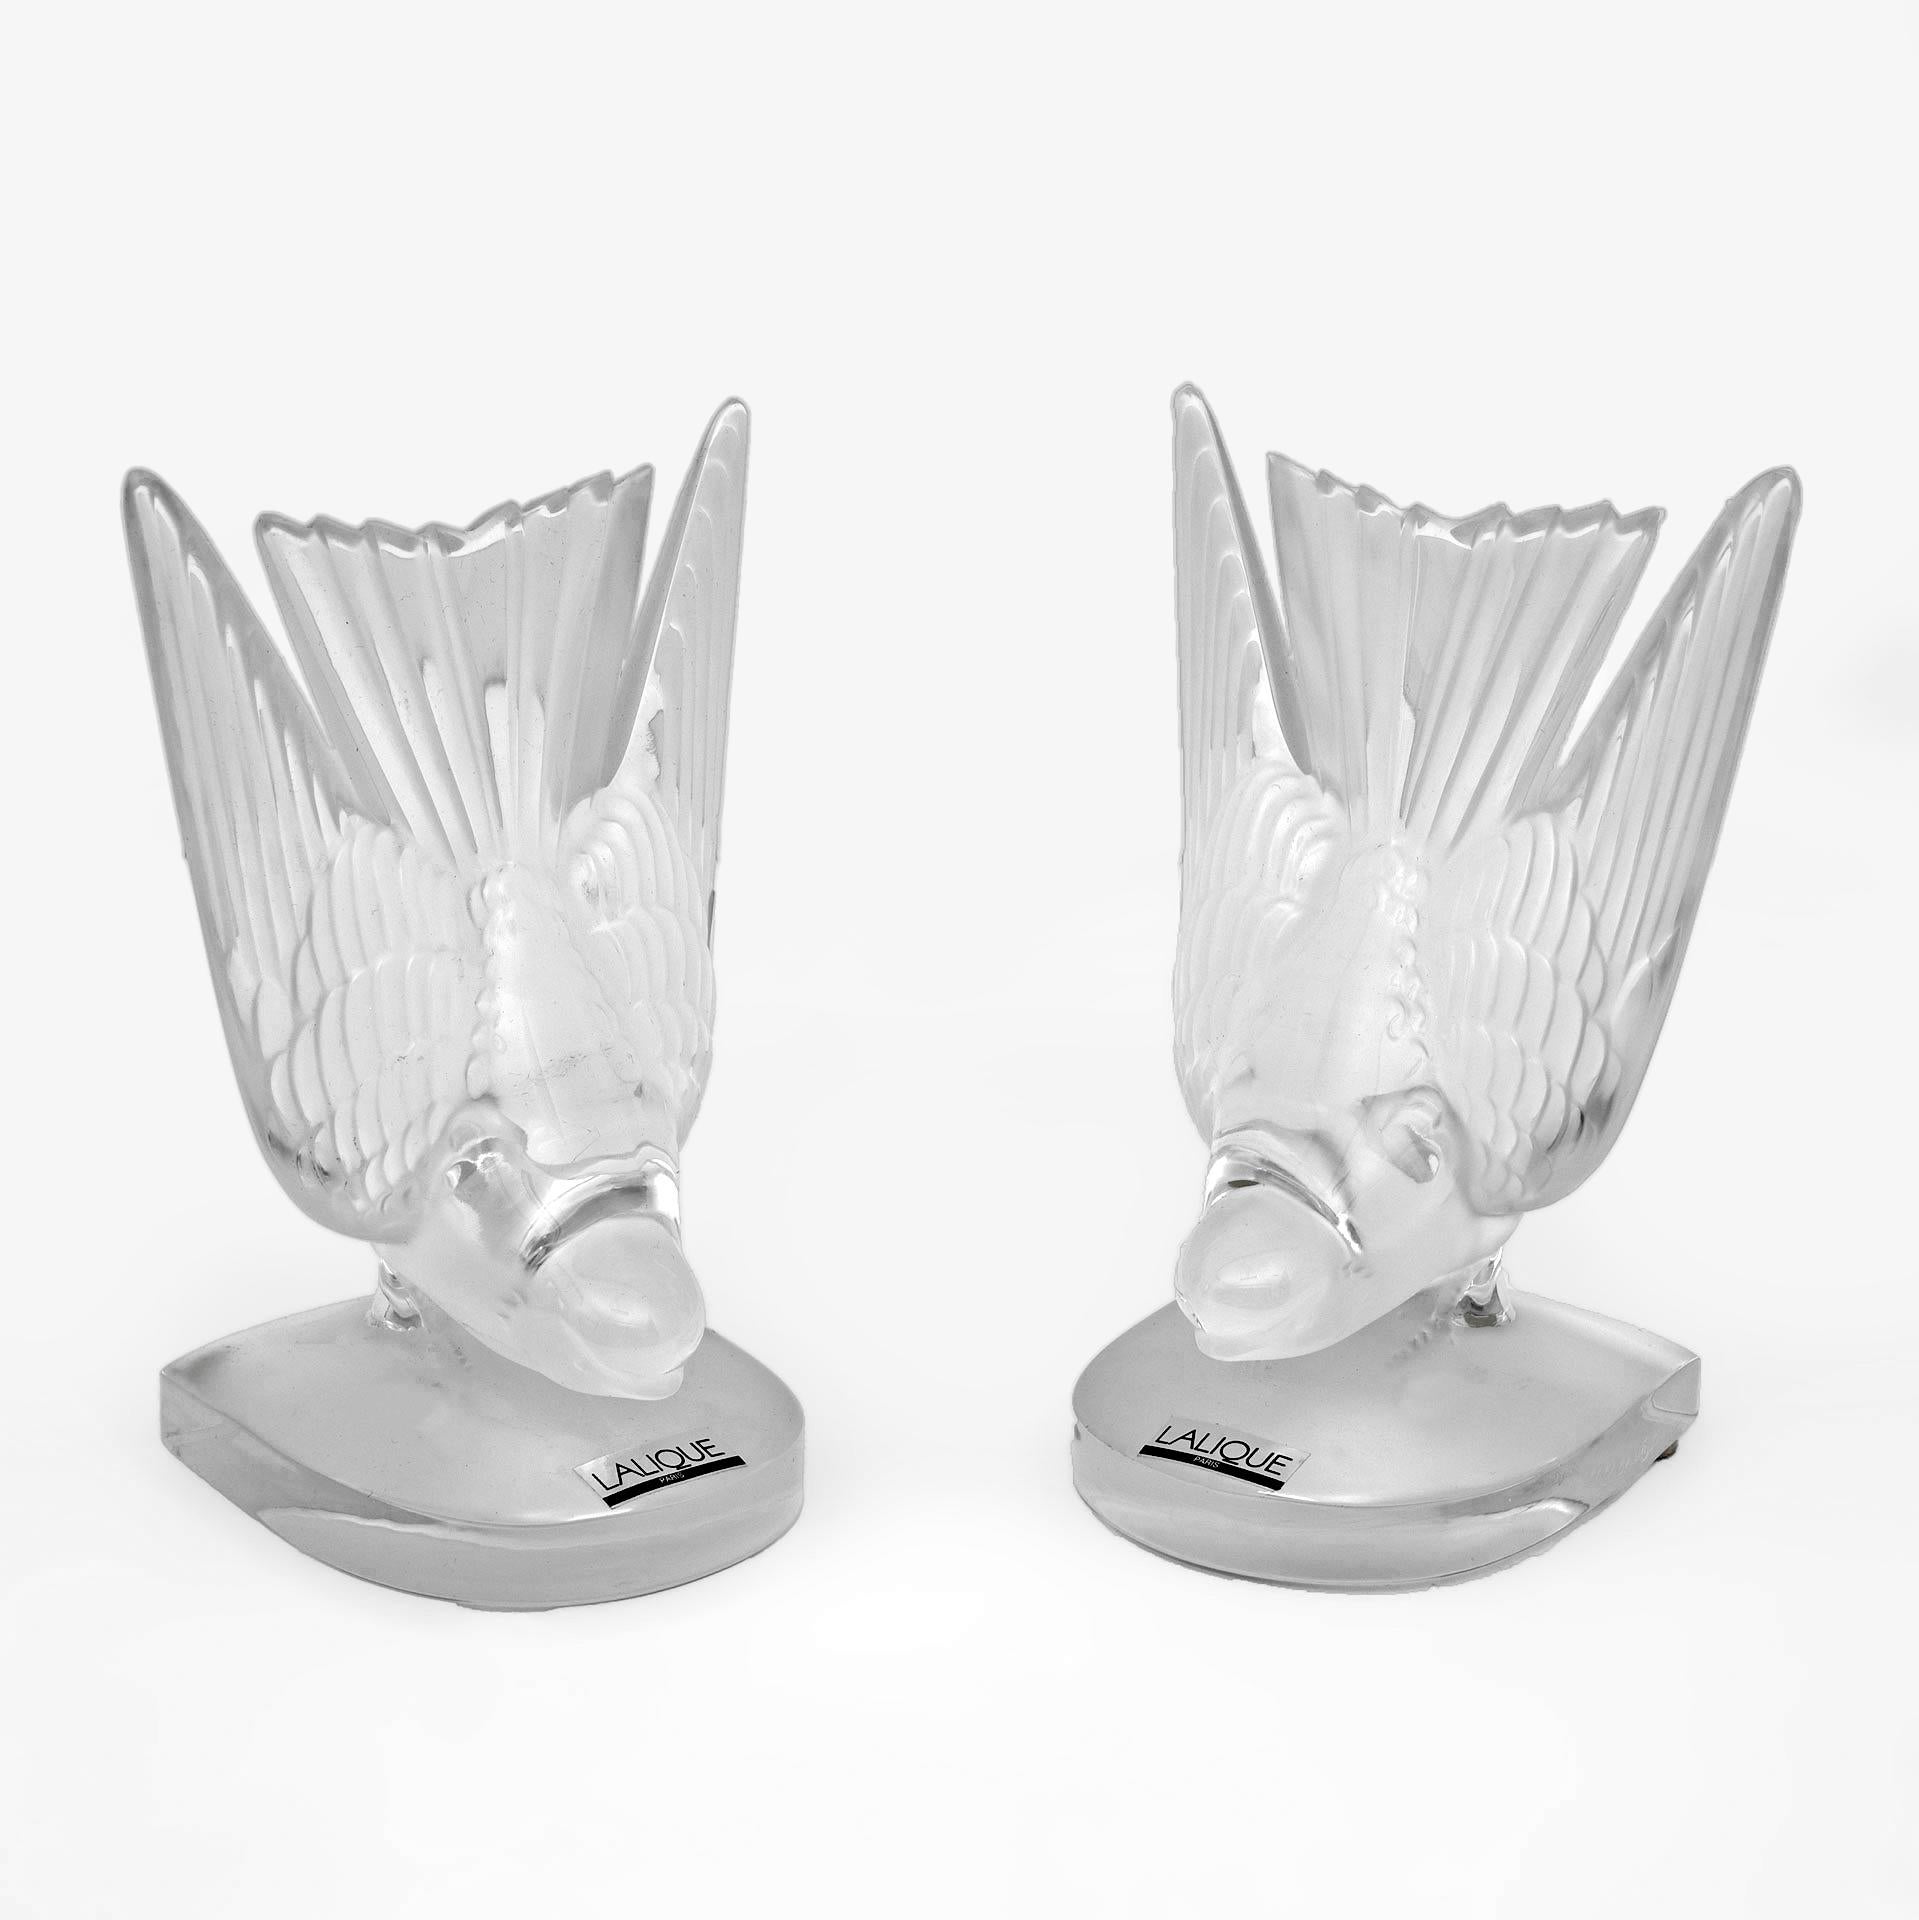 Splendid and elegant pair of hirondelles/swallows bookends, in frosted crystal, signed Lalique, France, circa 1980s.
The bookends are in perfect vintage condition, with no chips or cracks.
Signature engraved with diamond tip on both bookends and